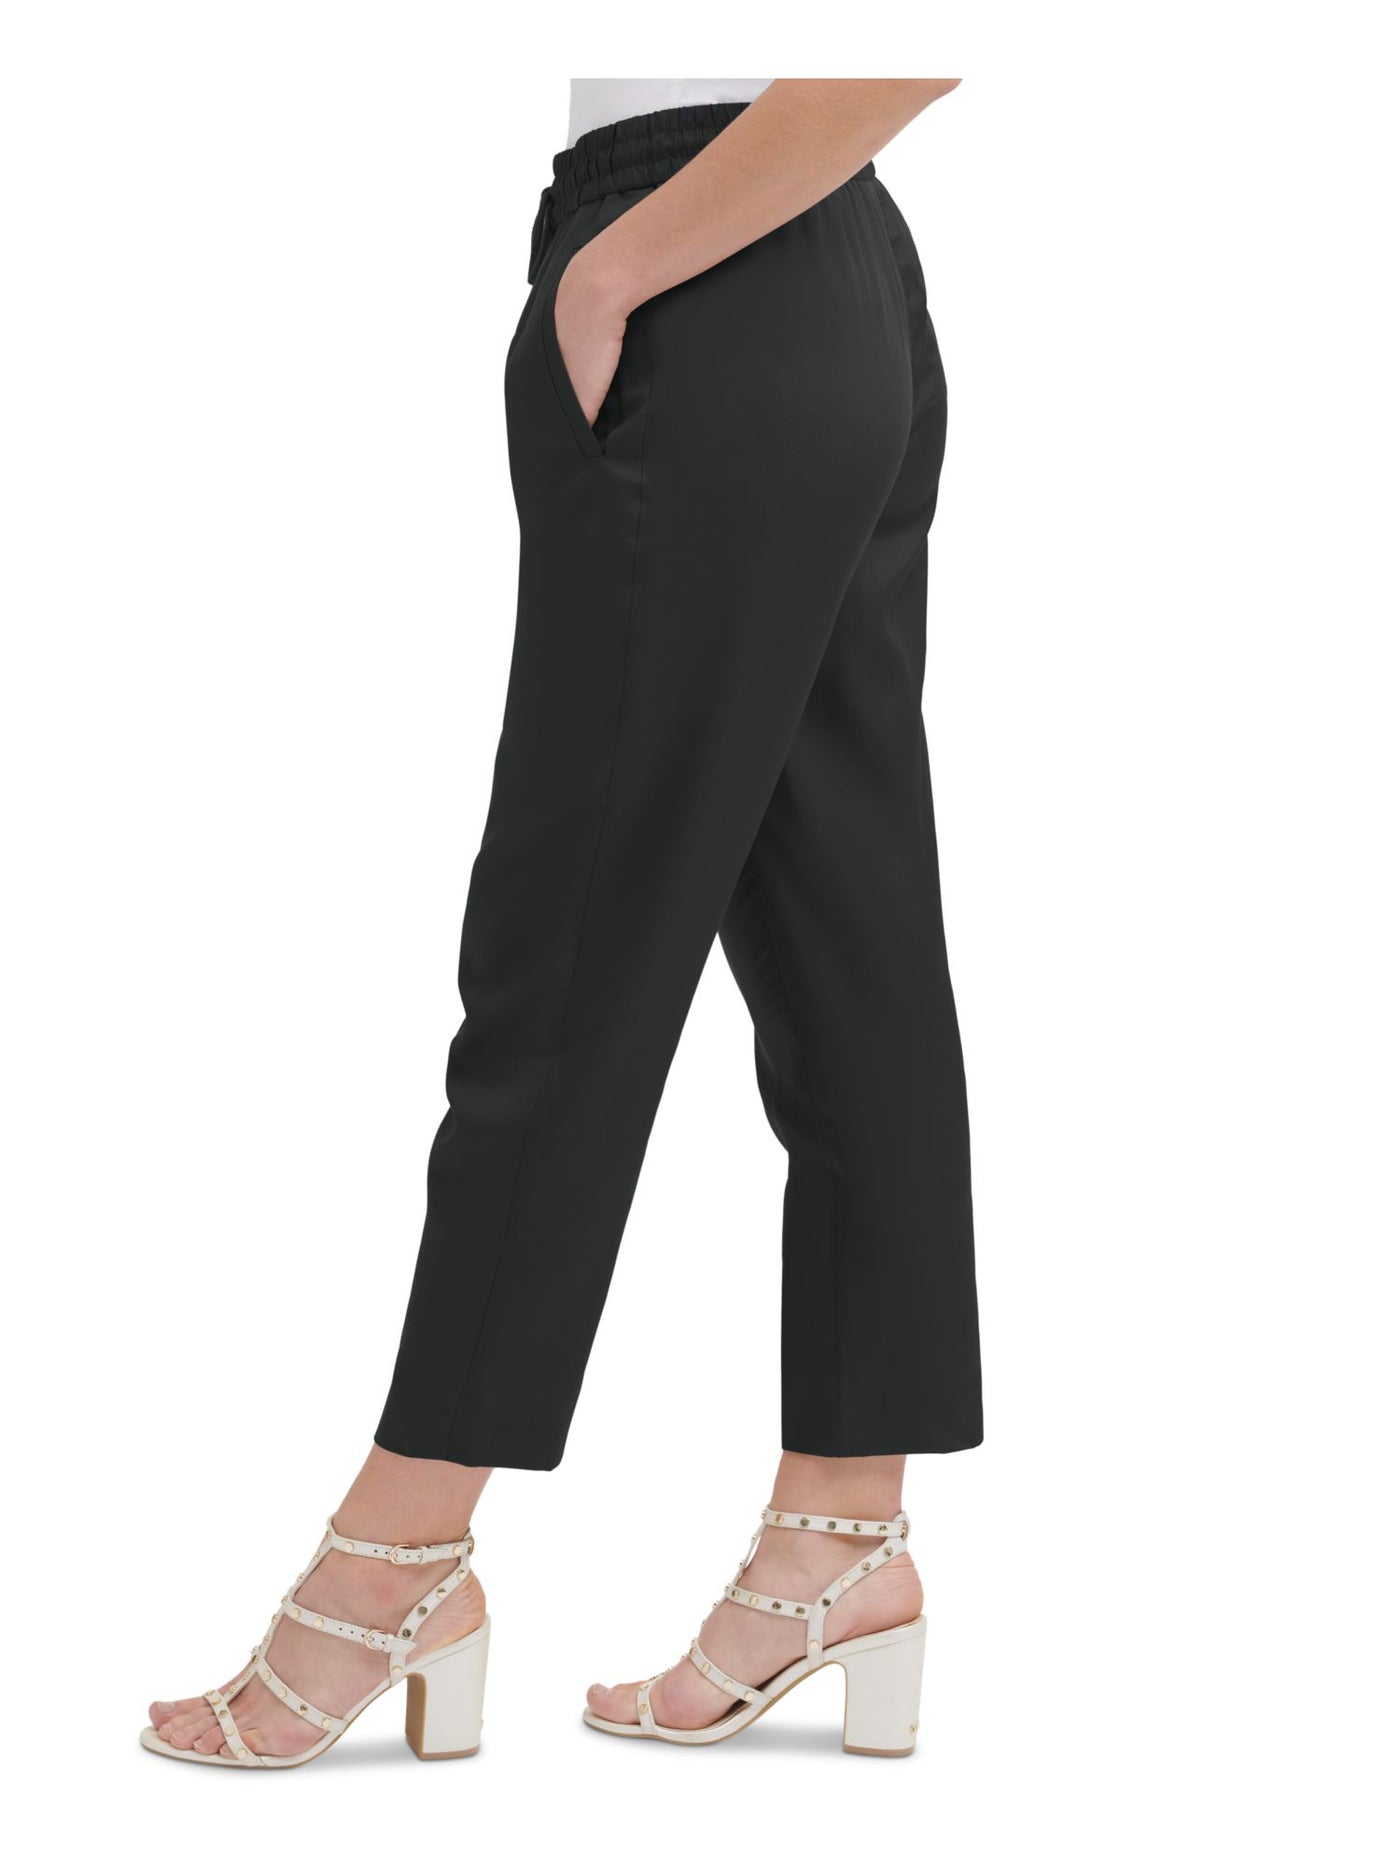 DKNY Womens Black Stretch Pocketed Pleated Drawstring Ankle Mid-rise Straight leg Pants 4